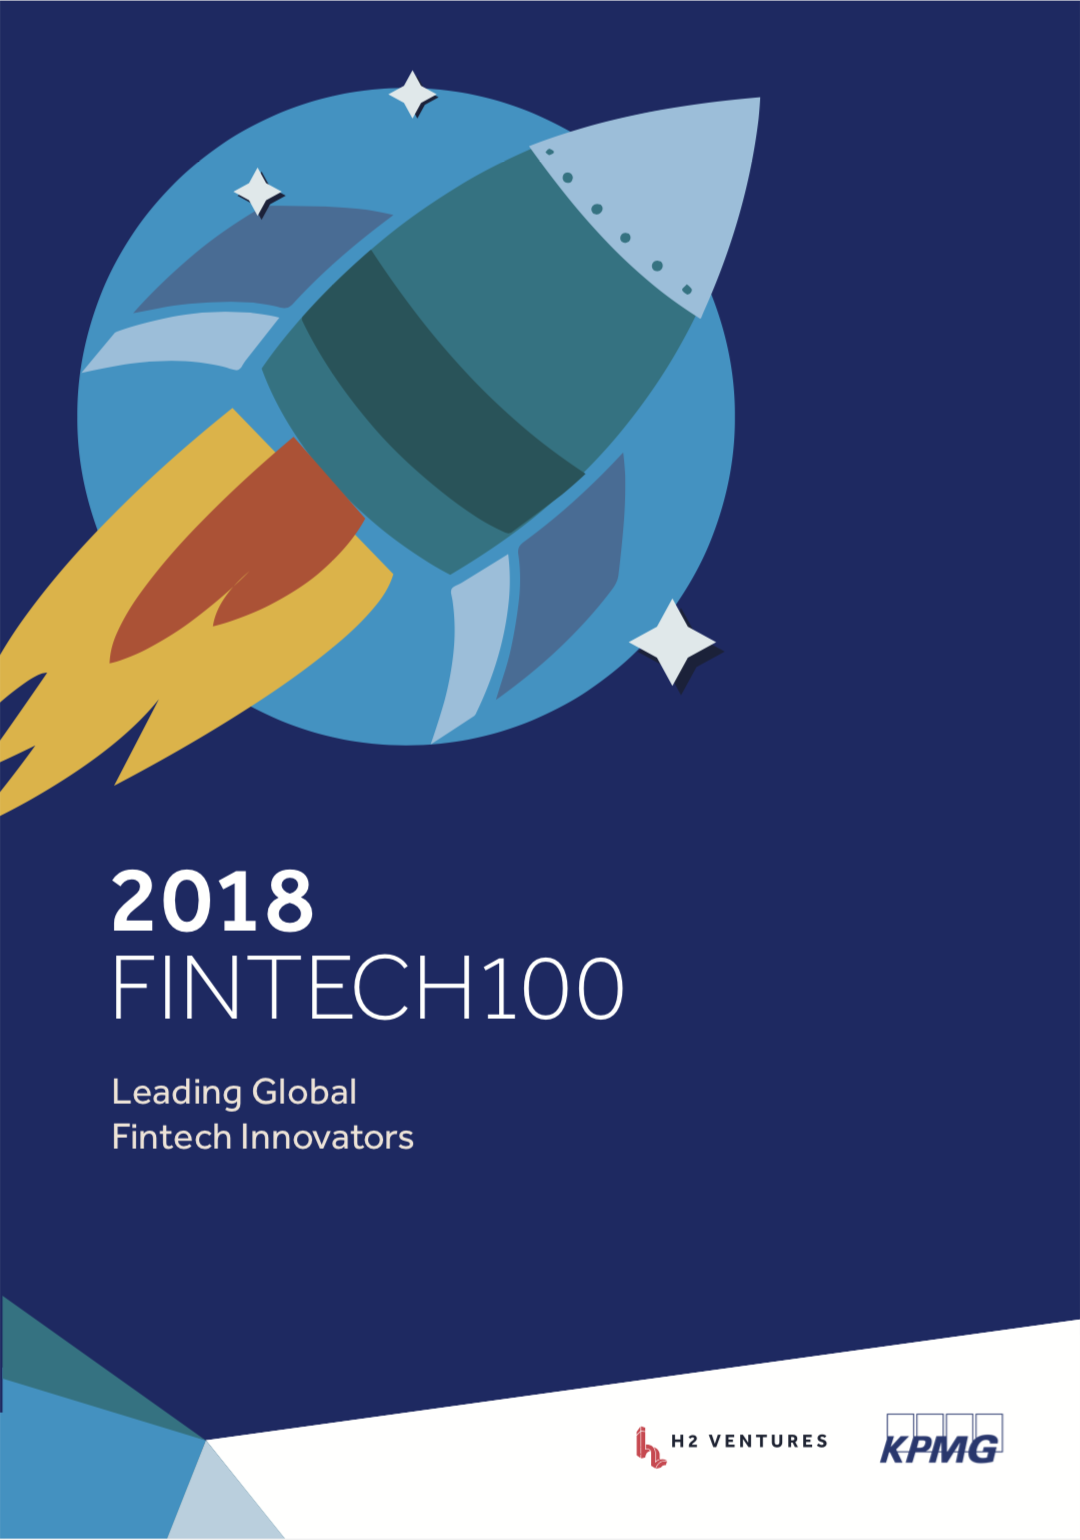 The Fintech100 – announcing the world’s leading fintech innovators for 2018